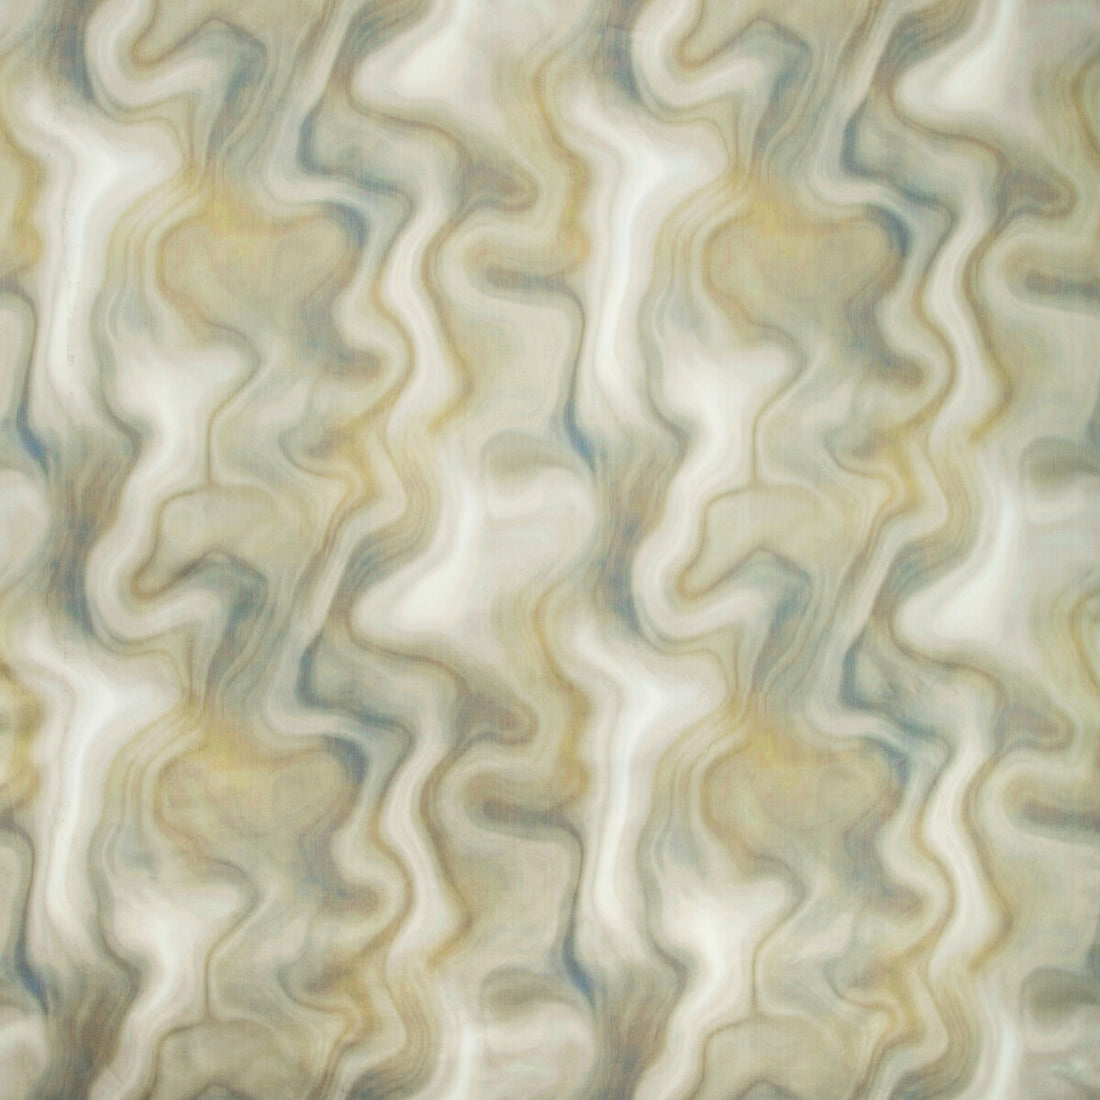 Azzurro-S fabric in moss color - pattern AZZURRO-S.3.0 - by Kravet Couture in the Terrae Prints collection